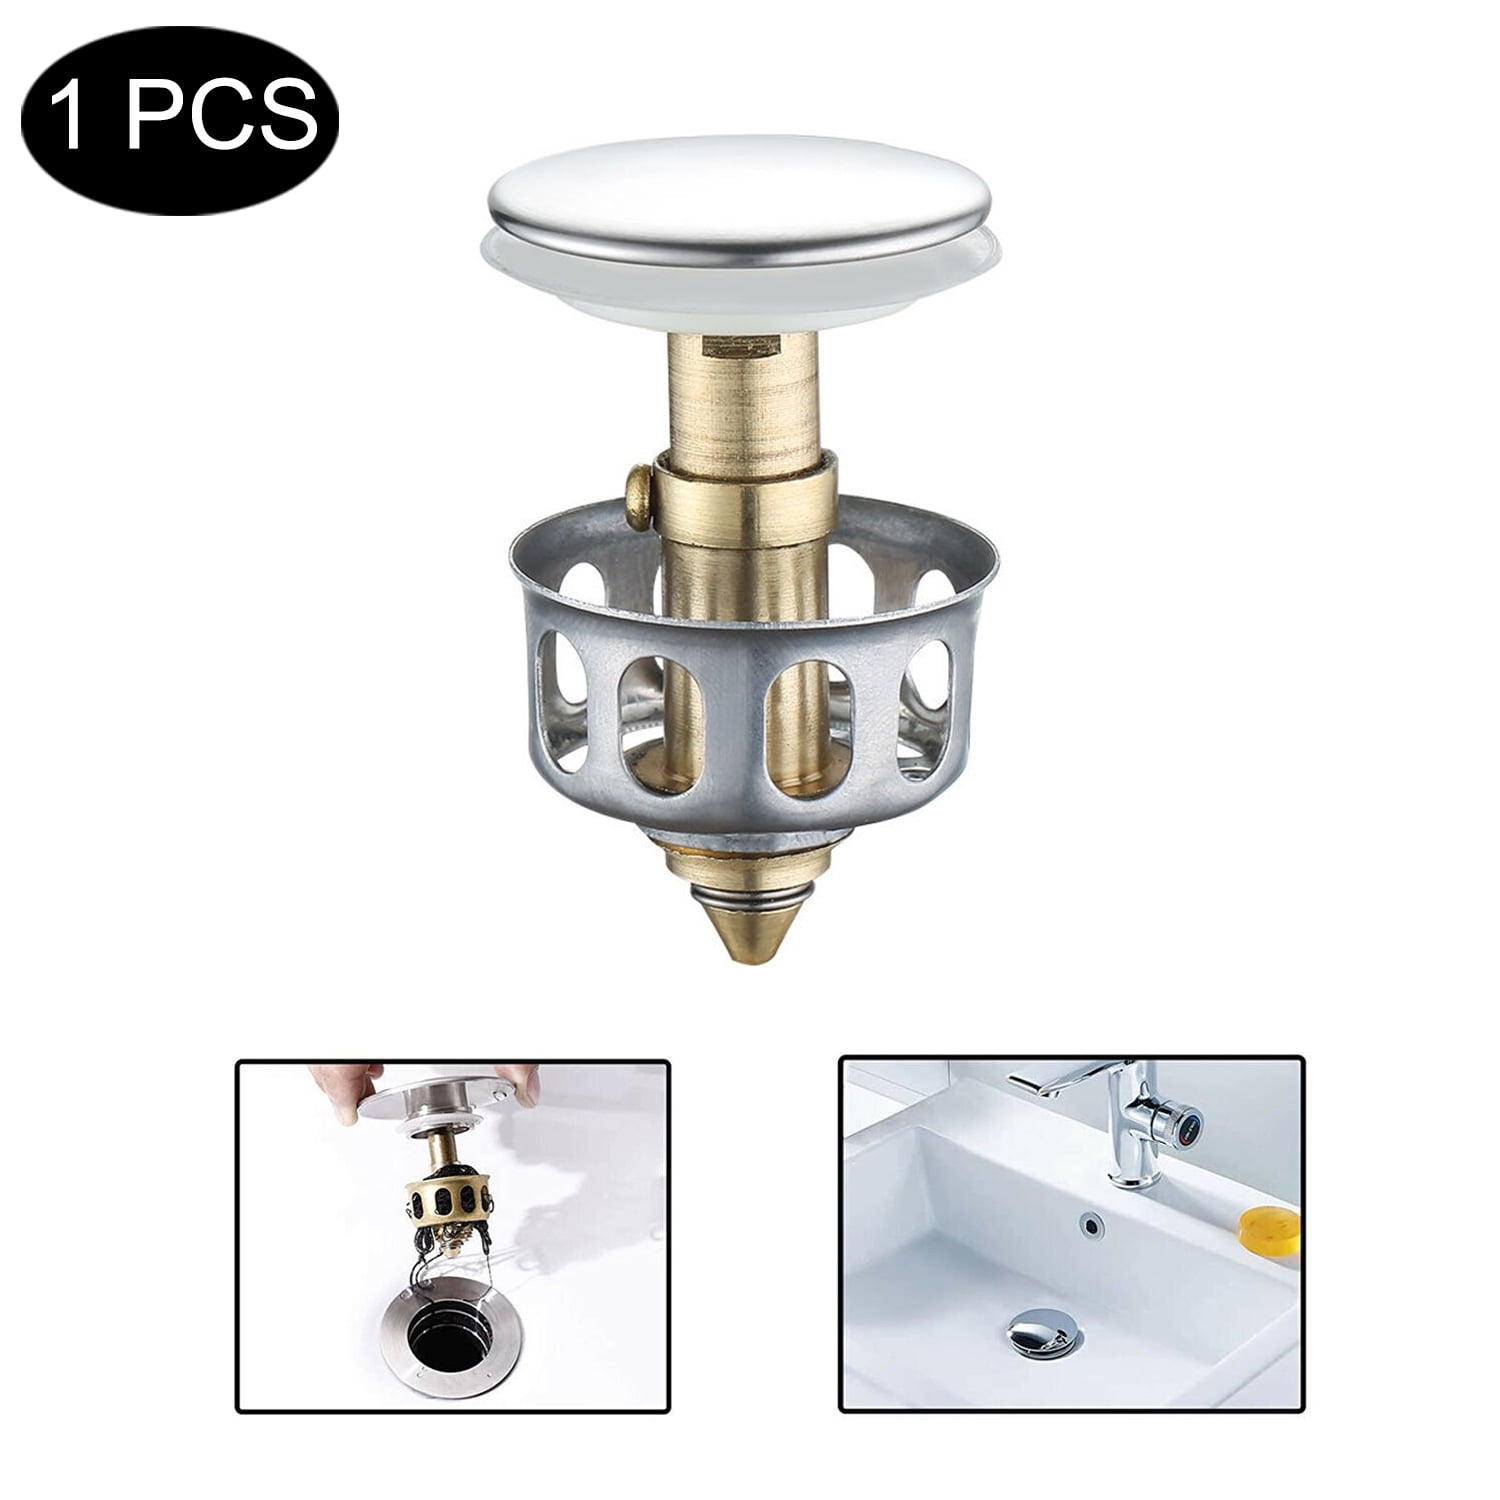 Details about   Wash basin bounce drain filter P op Up Bathroom Kitchen Sink Drain Plug Home 